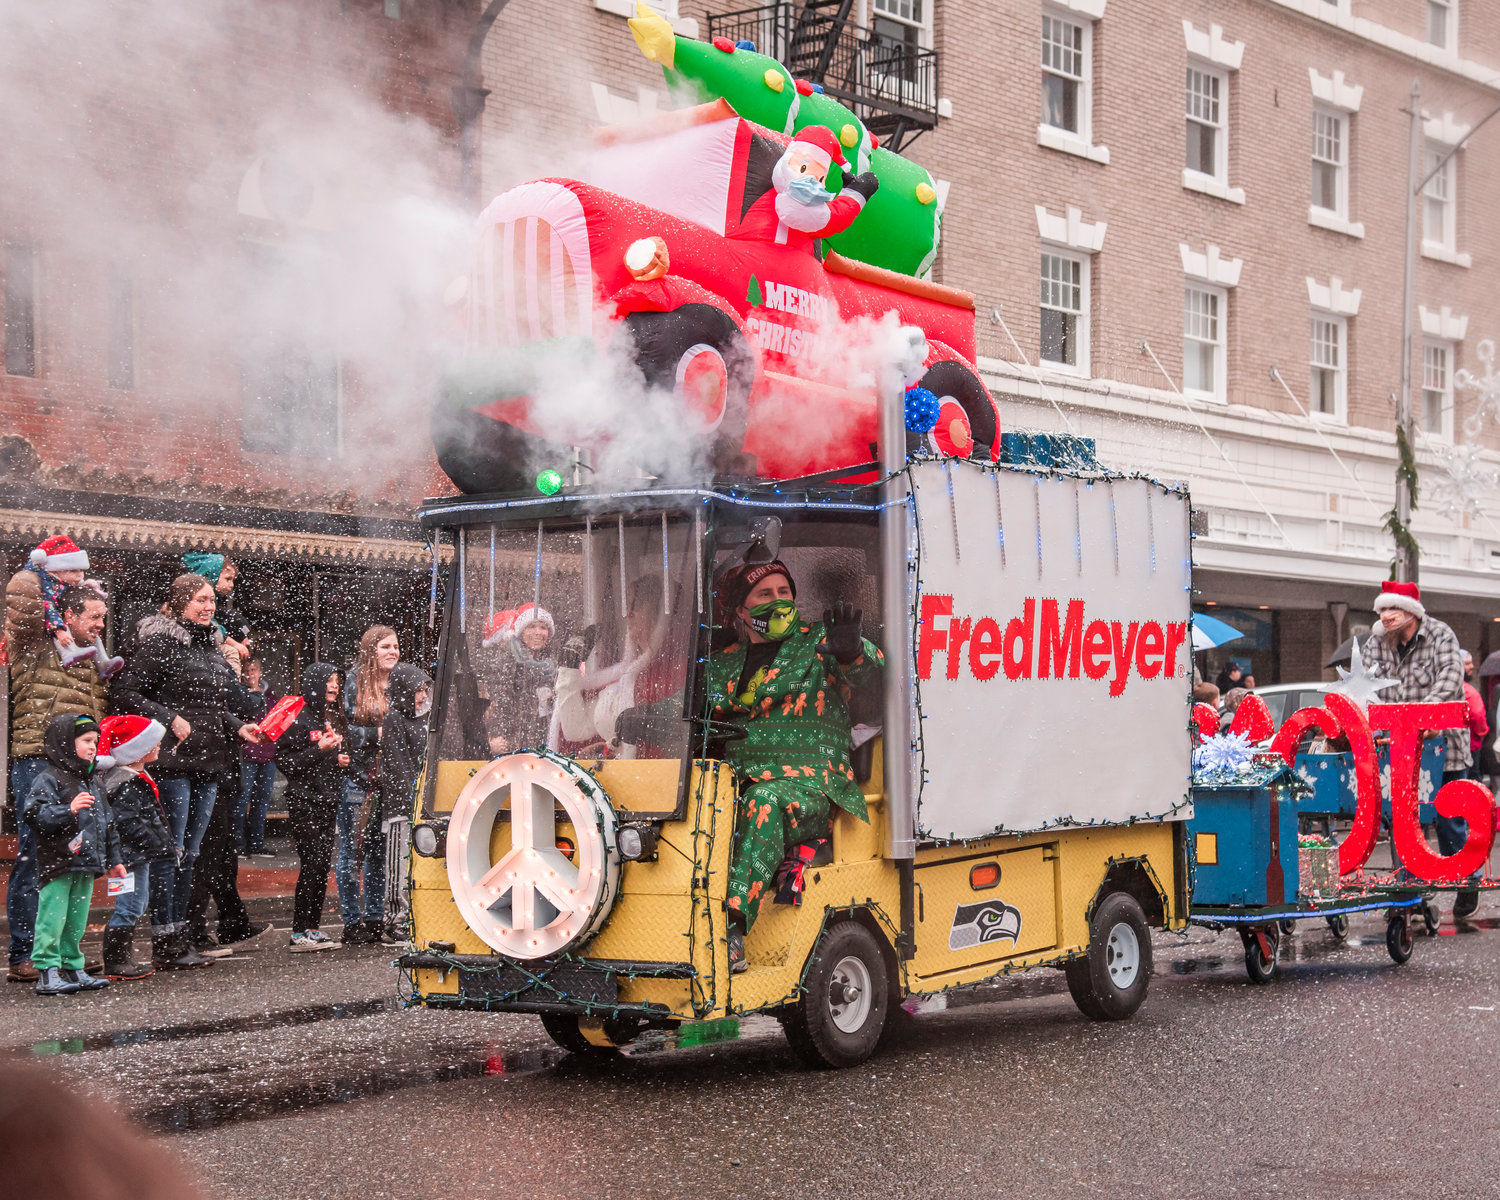 A snow machine rides through downtown Chehalis on a Fred Meyer float during the Santa Parade in downtown Chehalis on Saturday. “Peace on Earth,” was the theme for the parade.